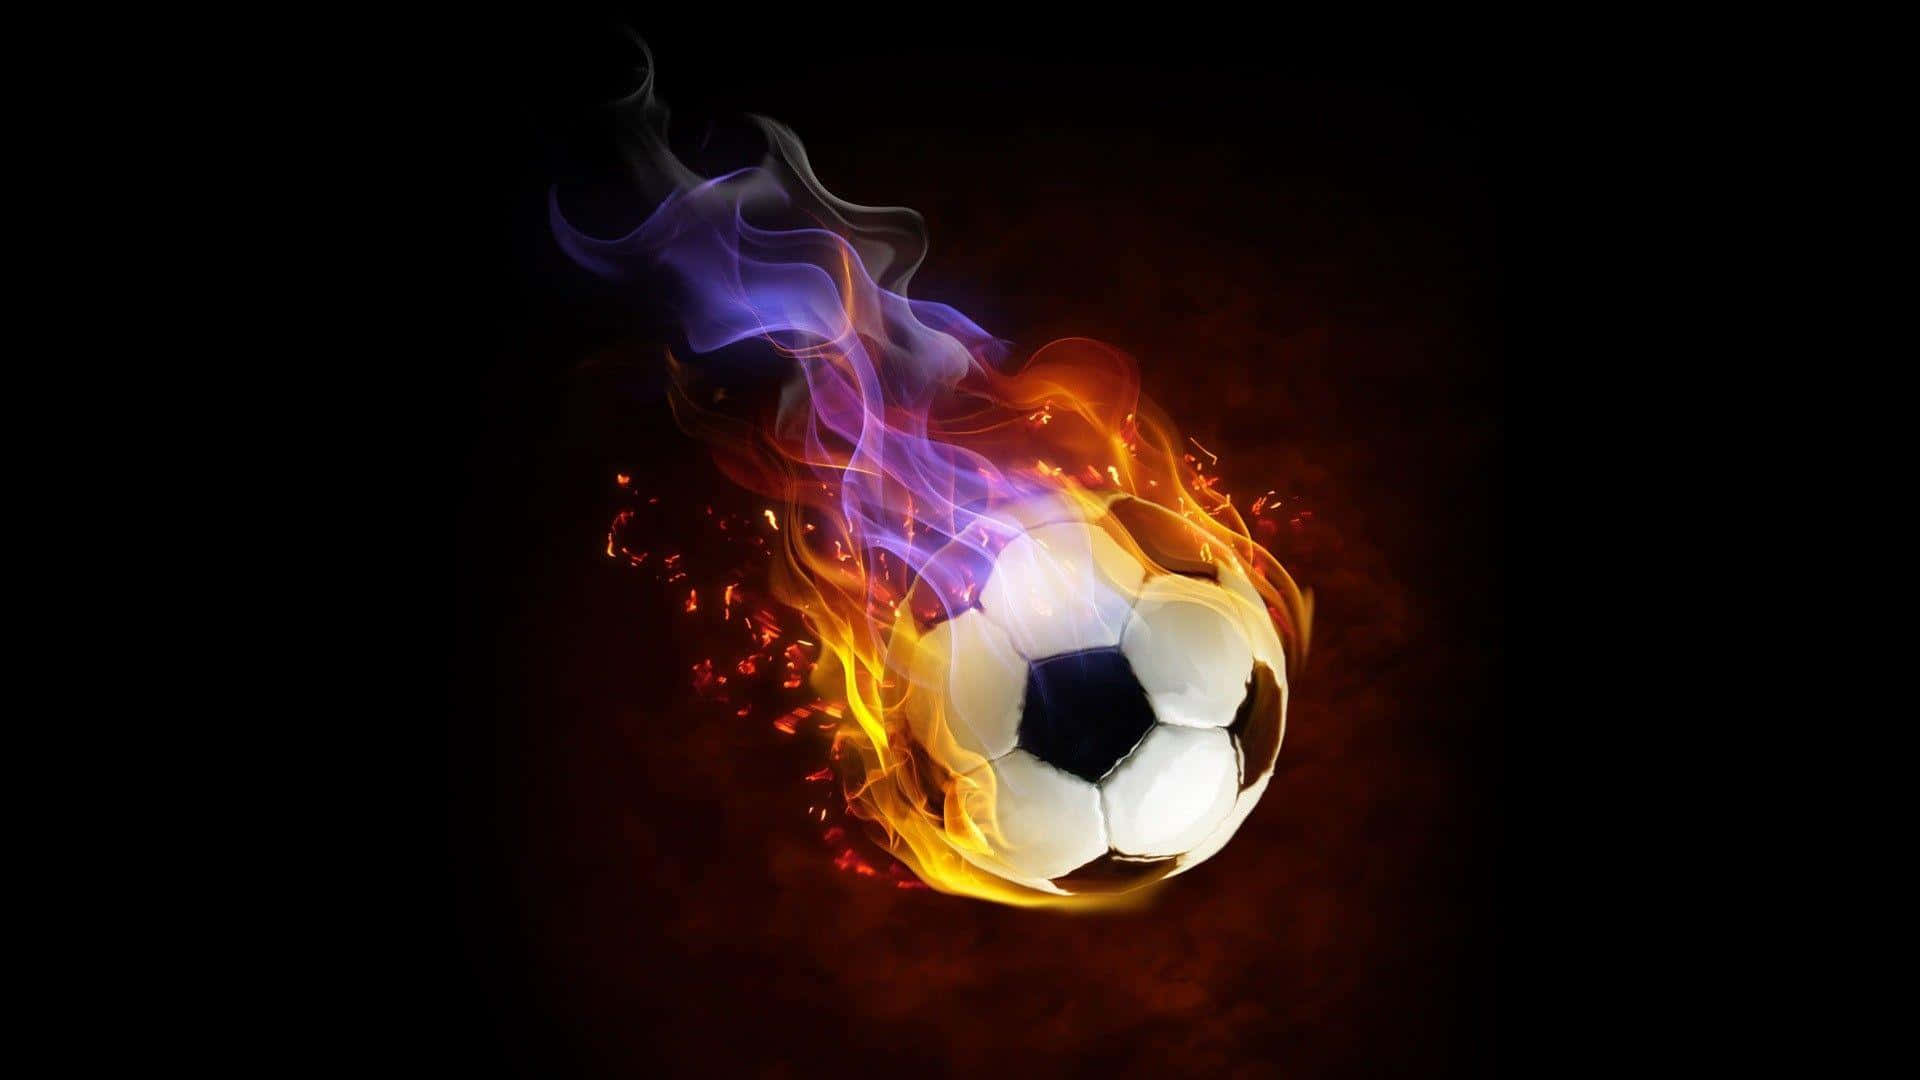 A Soccer Ball In Flames On A Black Background